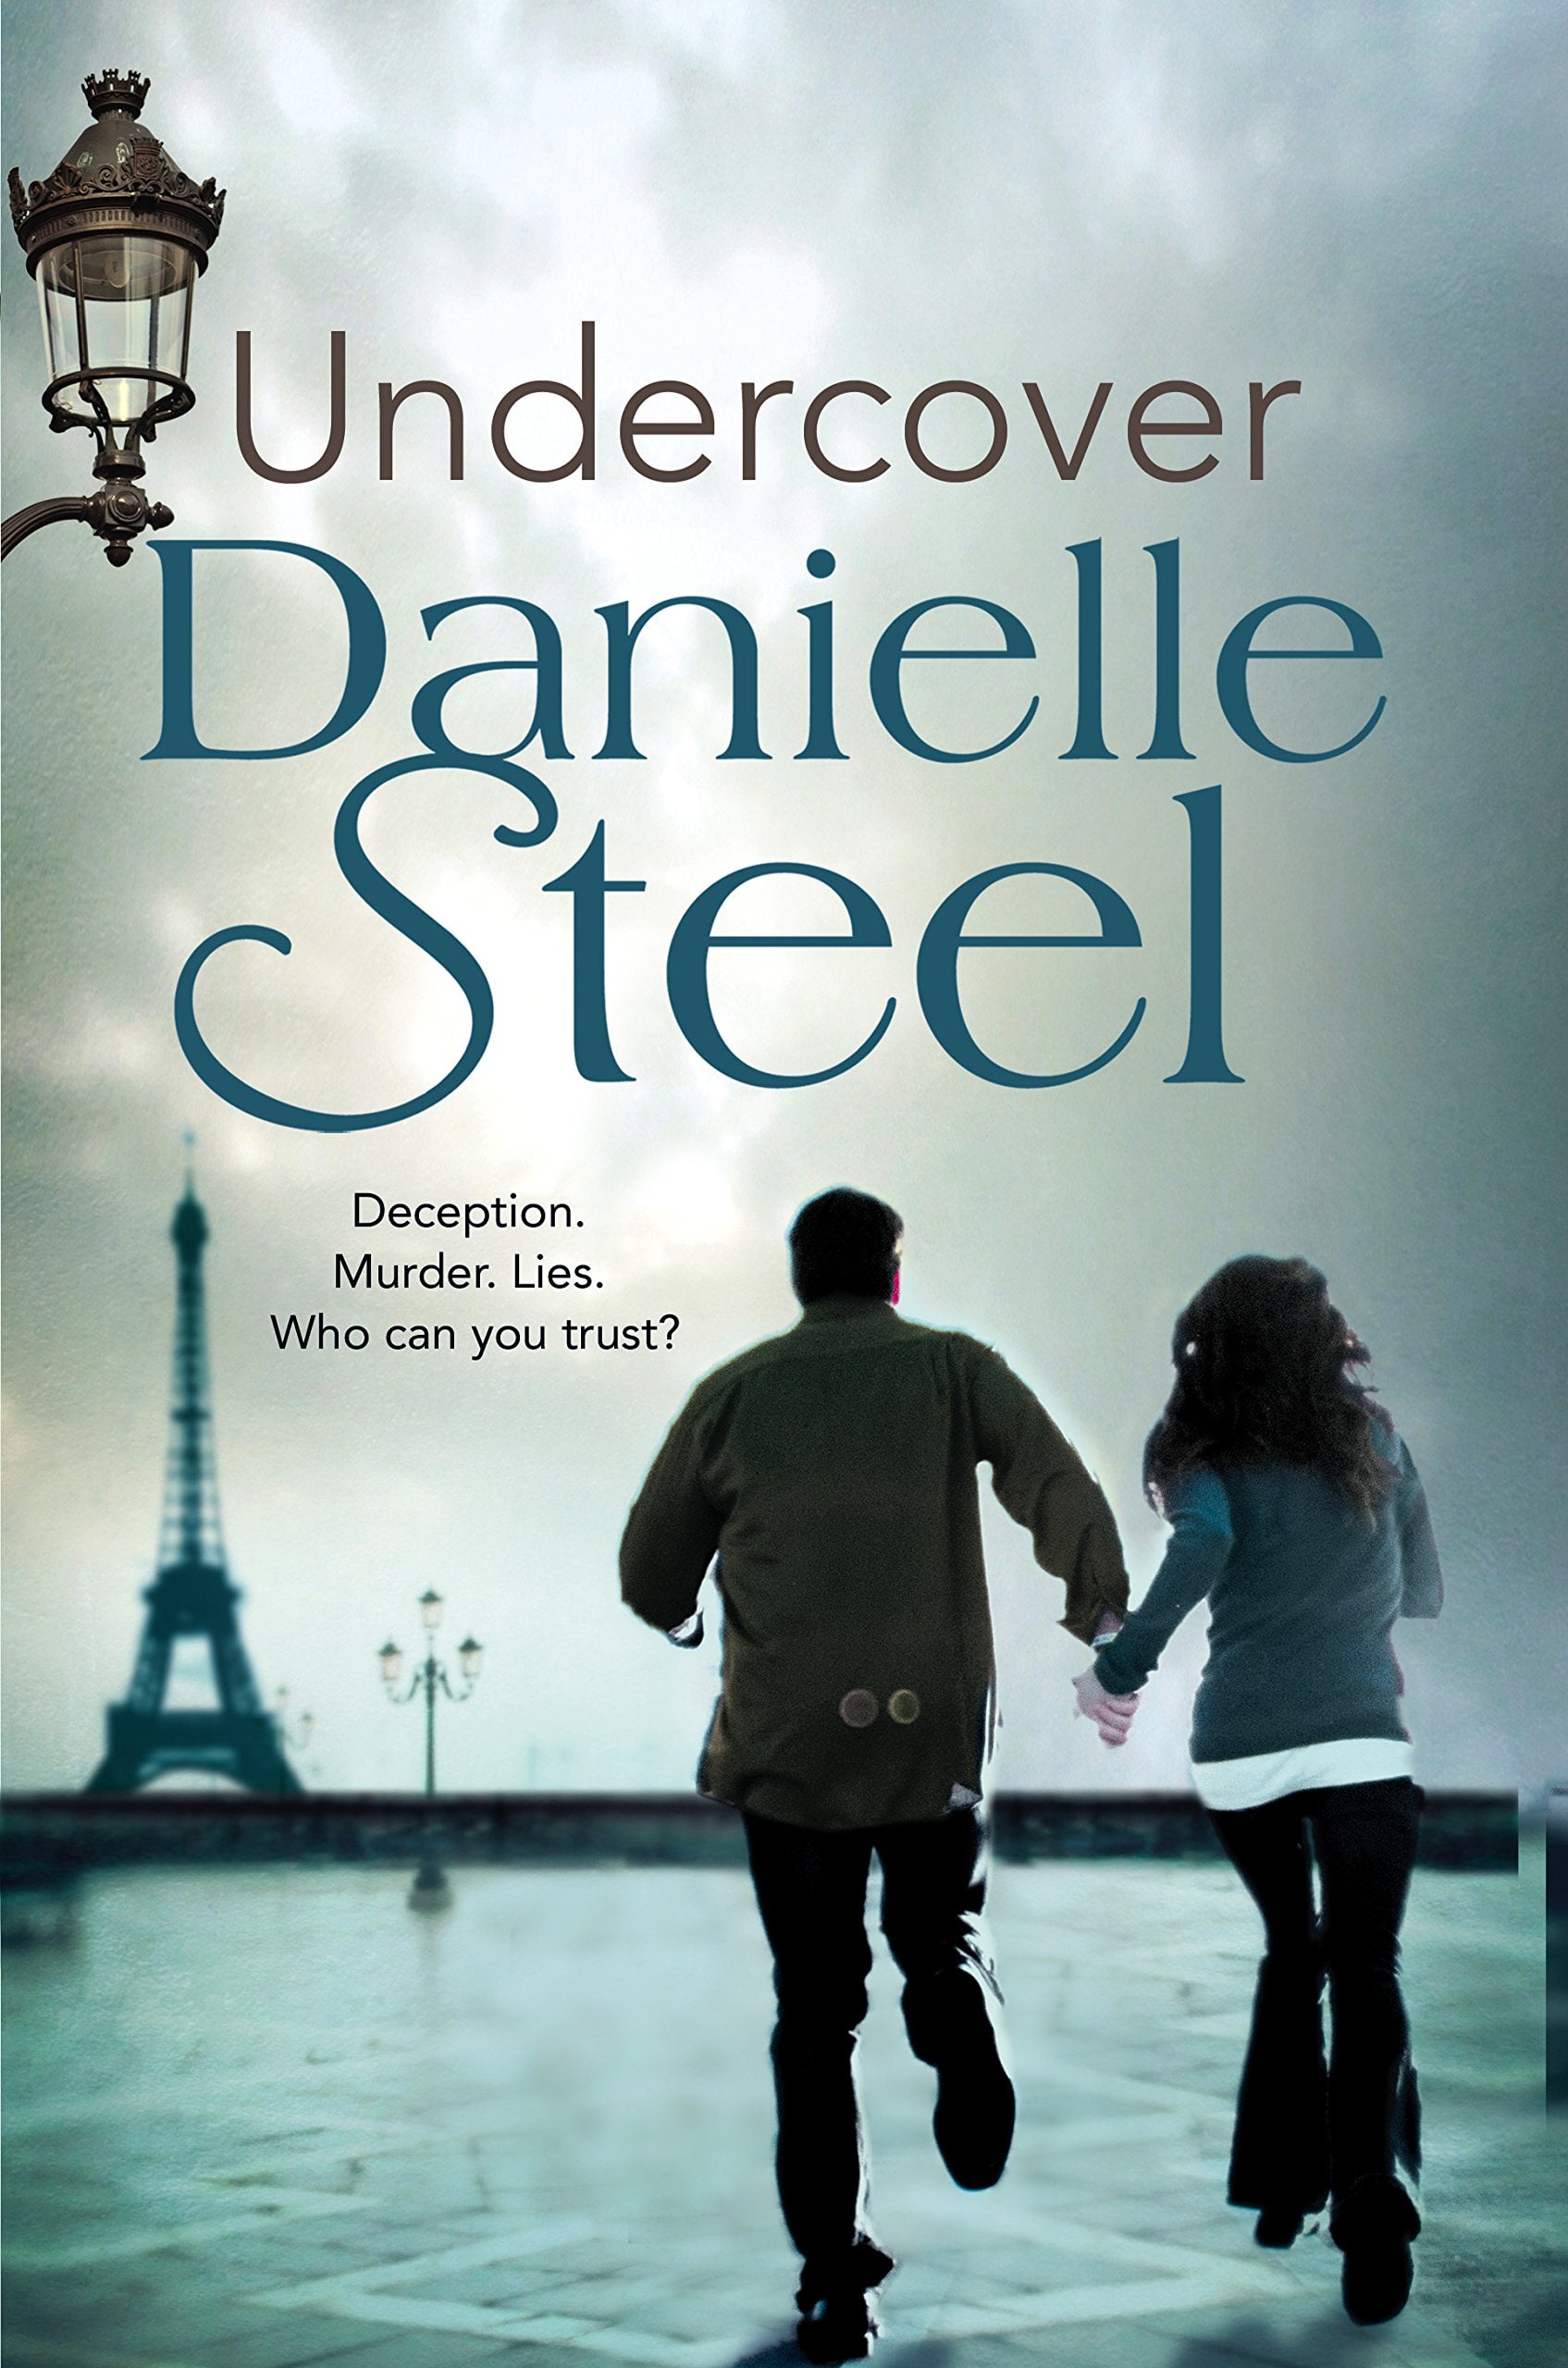 Undercover by Danielle Steel 29 New Books You'll Want to Read This